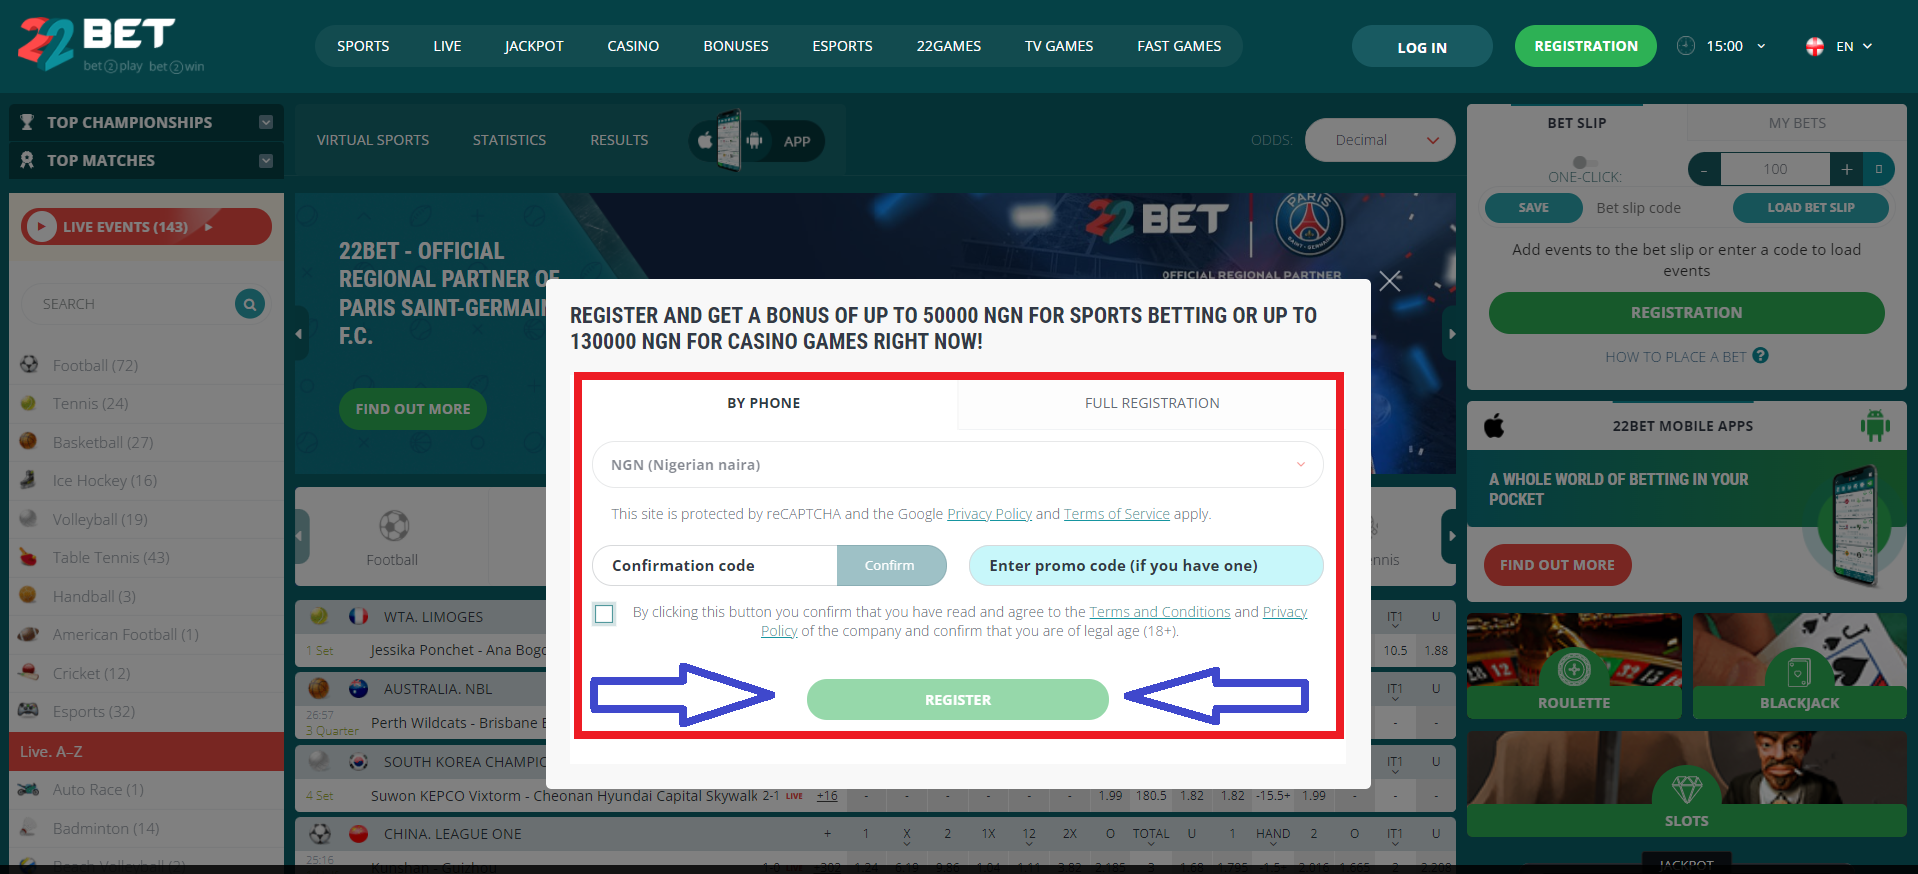 Features of the registration process at 22Bet Nigeria